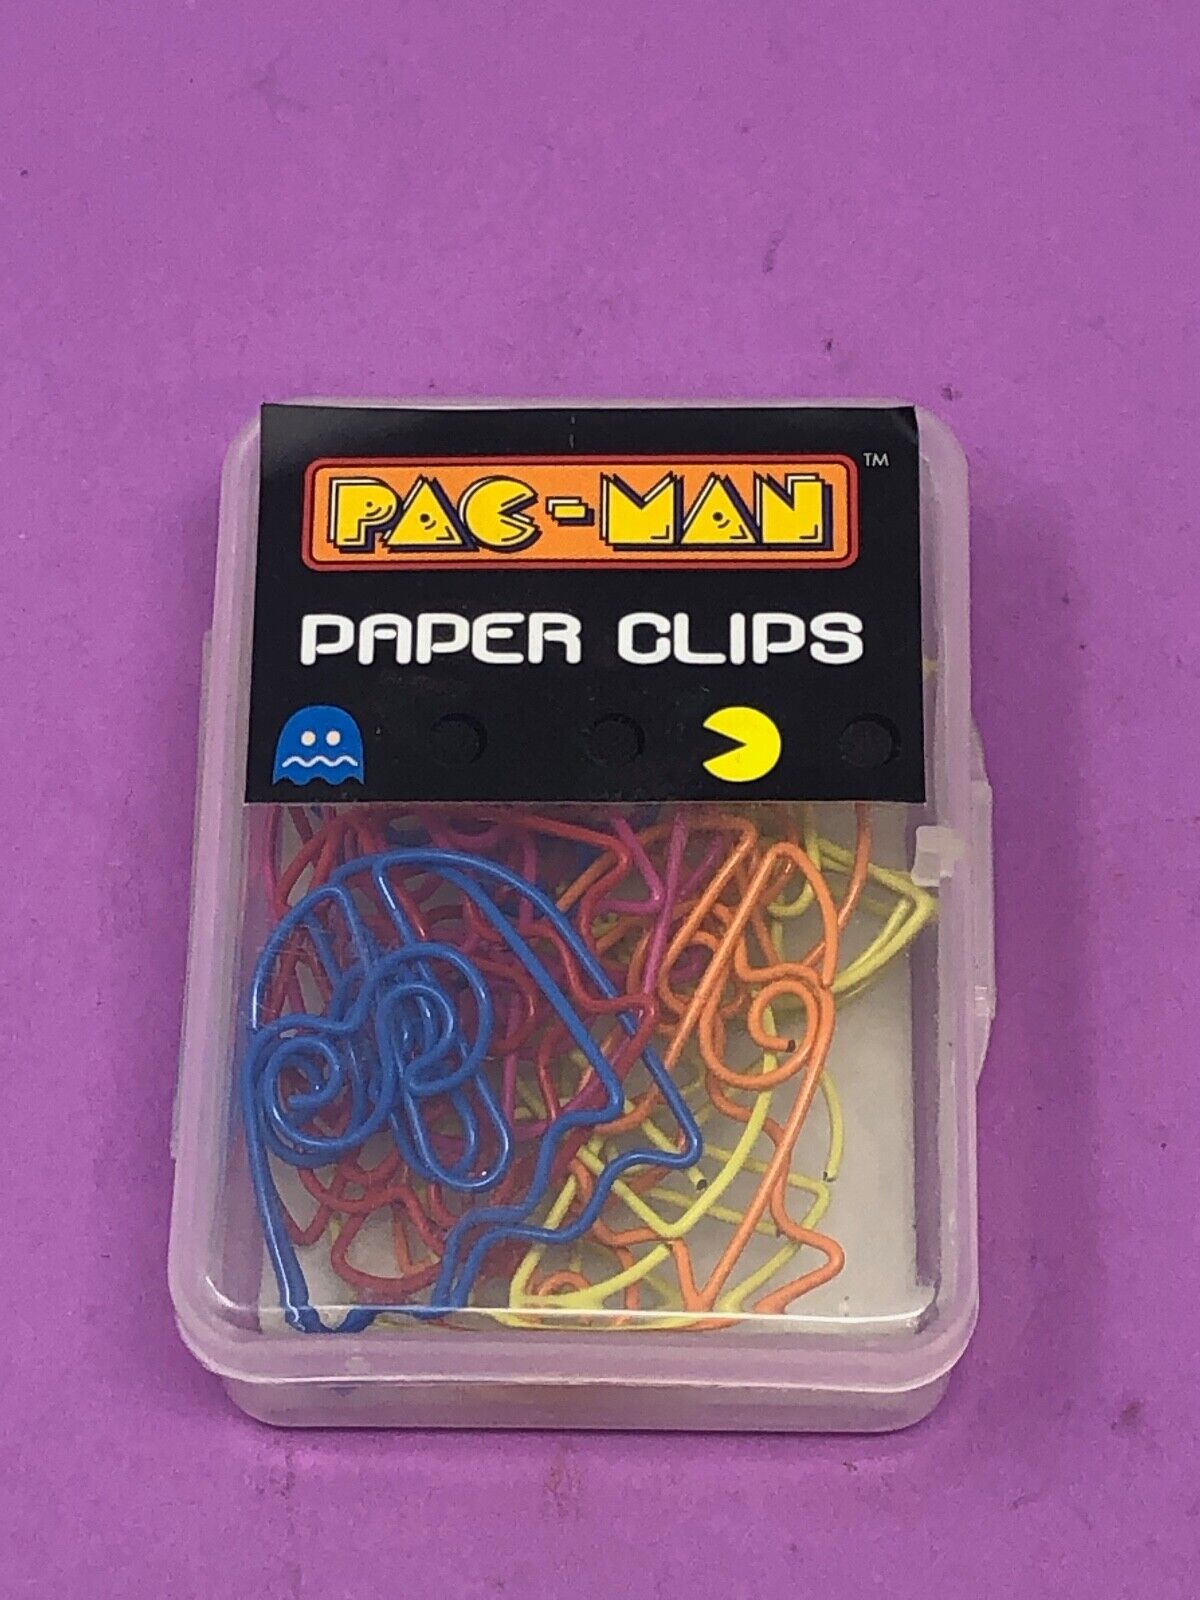 Pac-Man Paper Clips by Paladone - Brand new in package